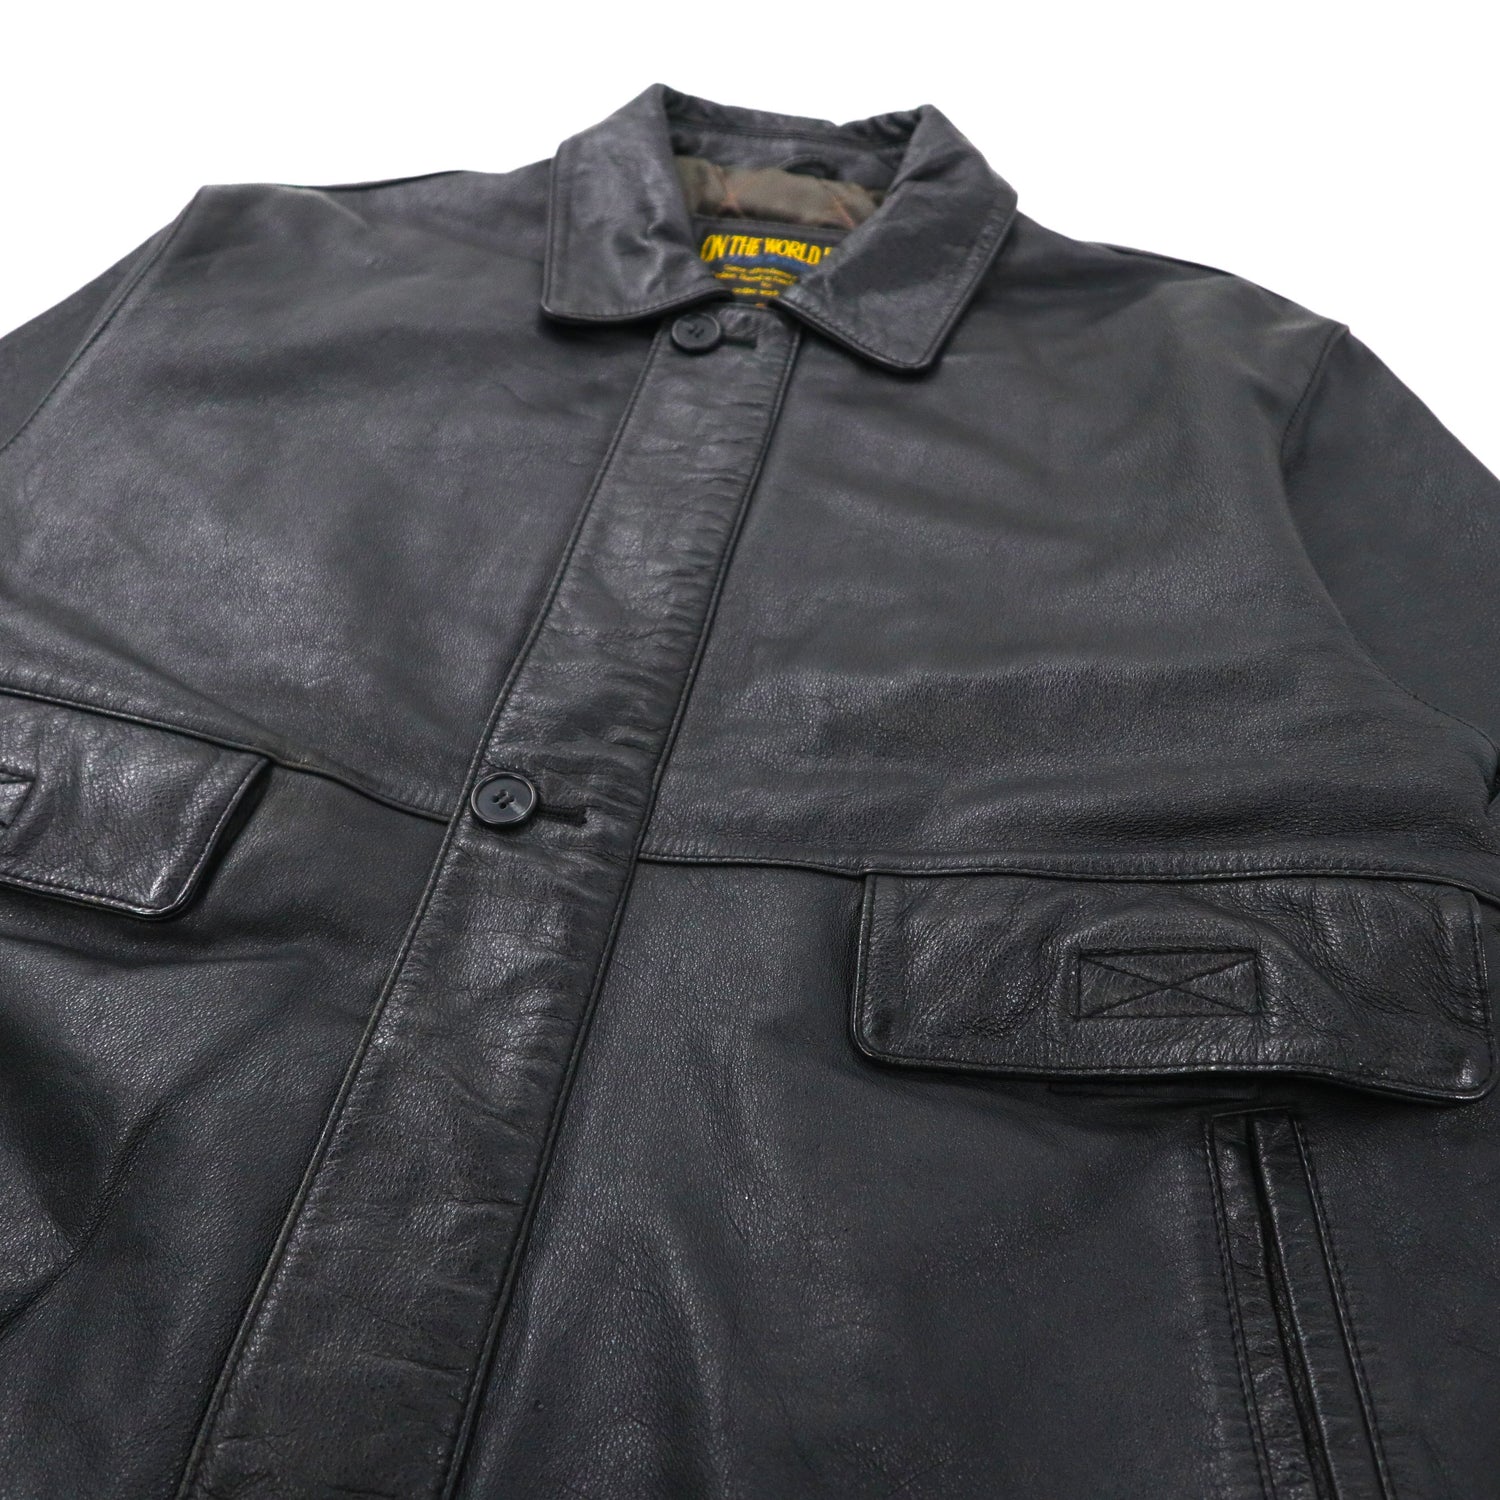 ON THE WORLD INC A-2 Leather Flight Jacket L Black Cowhide ...